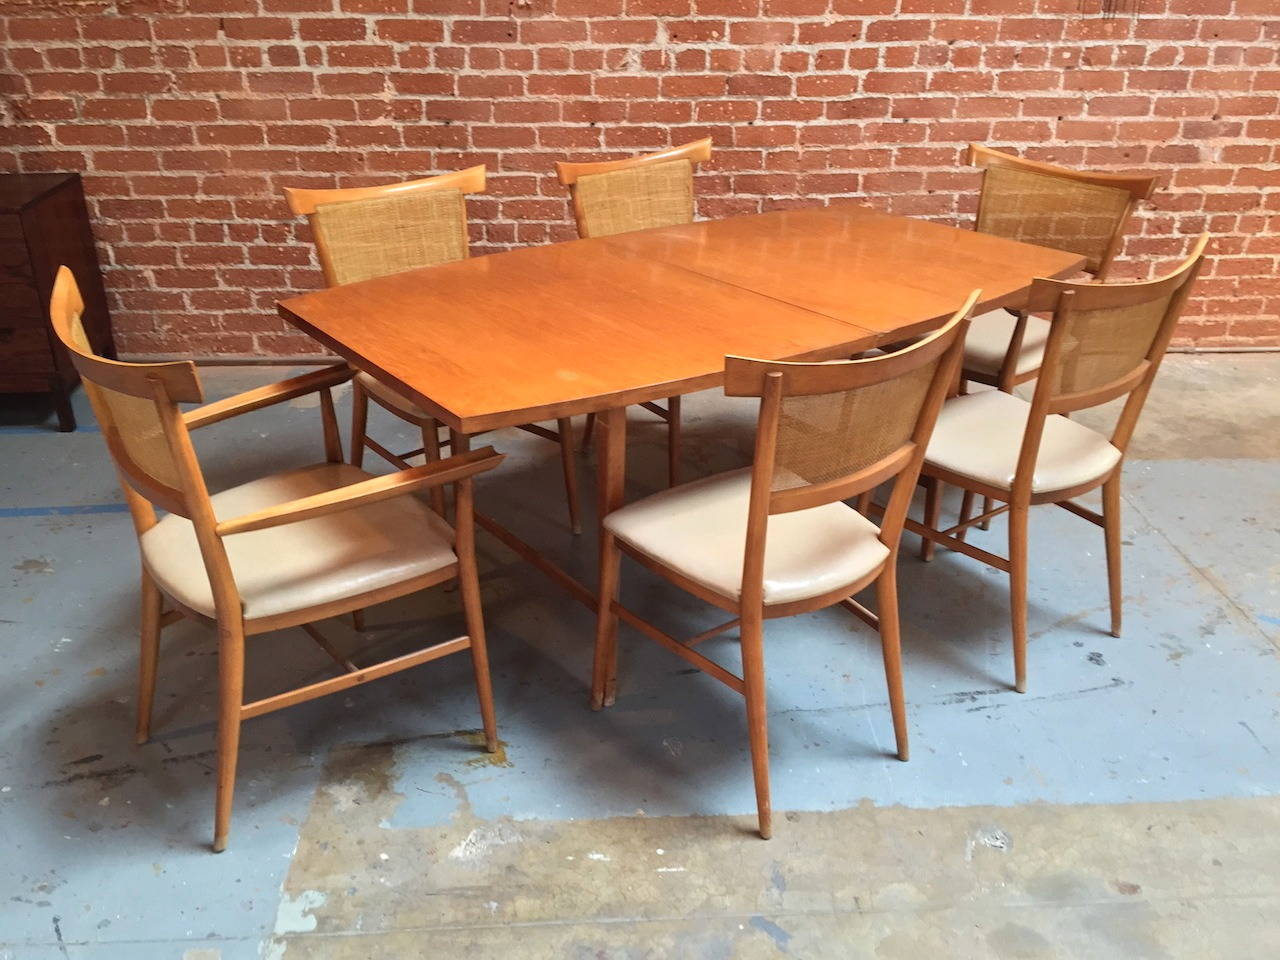 Rare Paul McCobb Planner Group dining set table and six chairs. Sold in original as found condition for restoration. Minor wear as pictured.